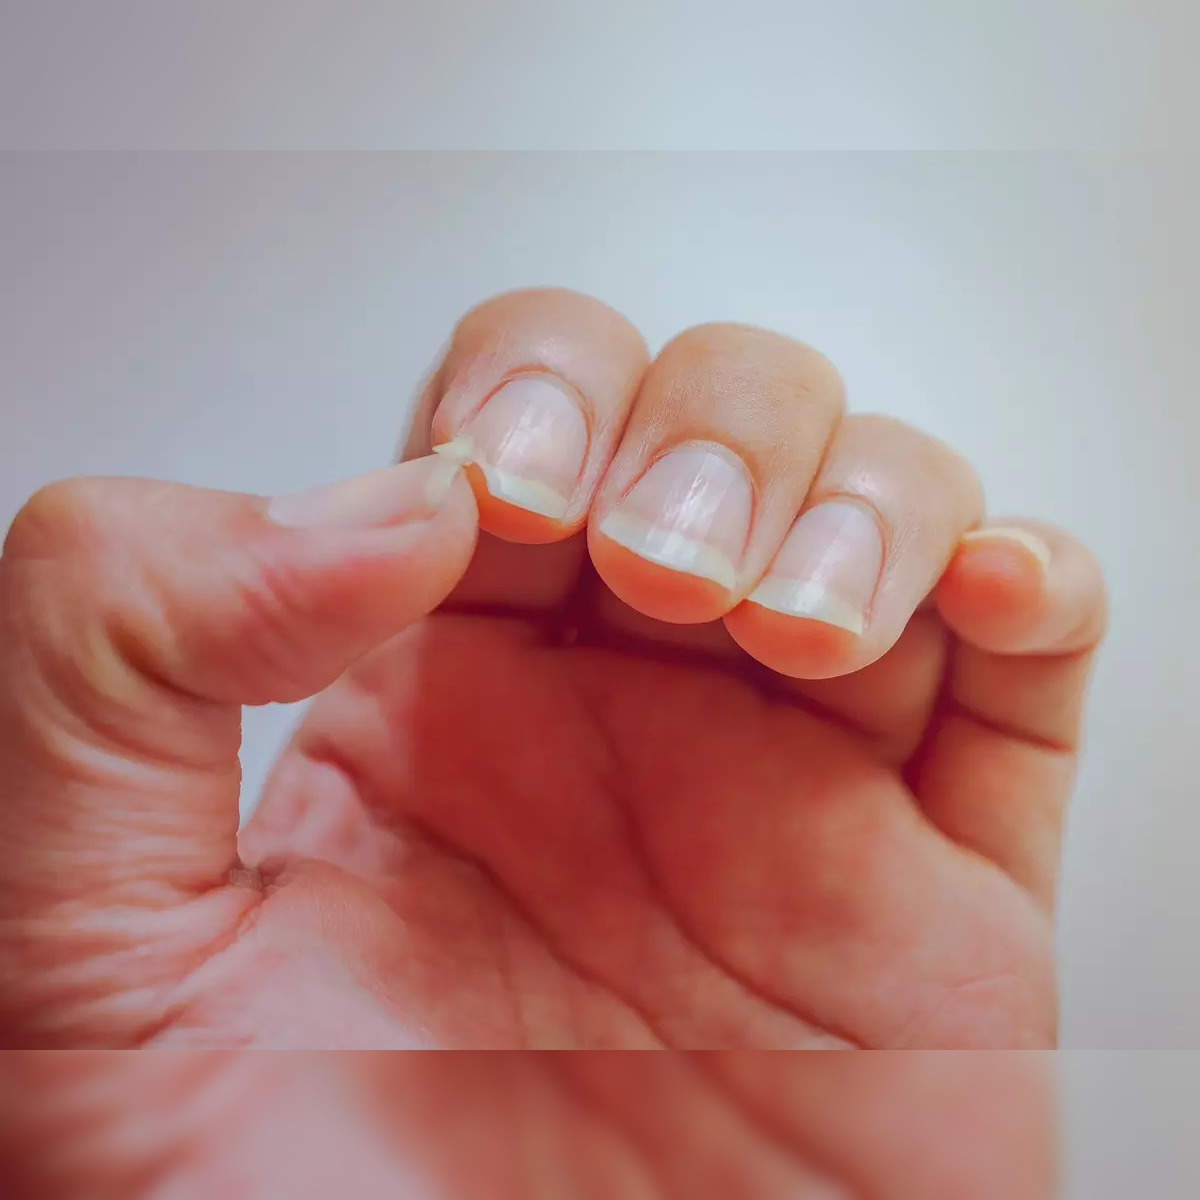 What Your Fingernail Health May Indicate About You